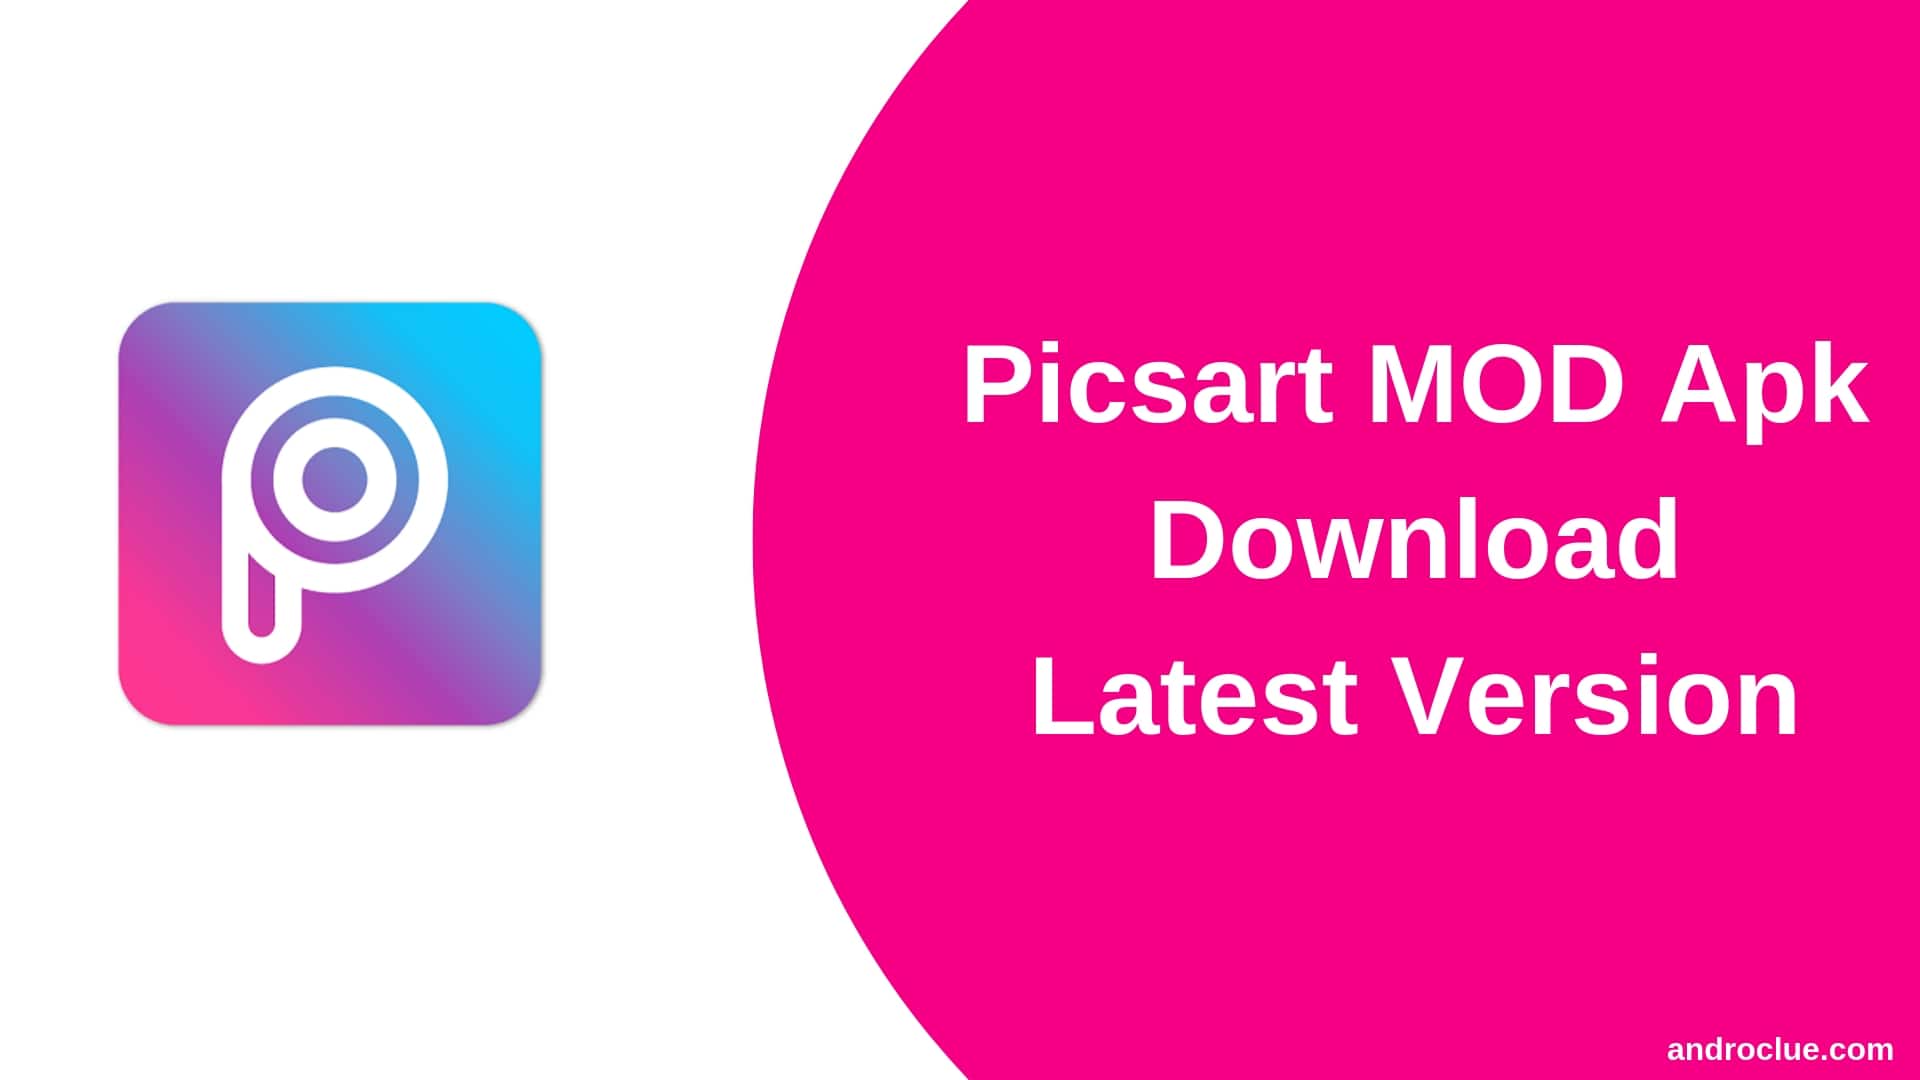 Picsart Mod Apk Download Latest V13 0 For Android Pc 2019